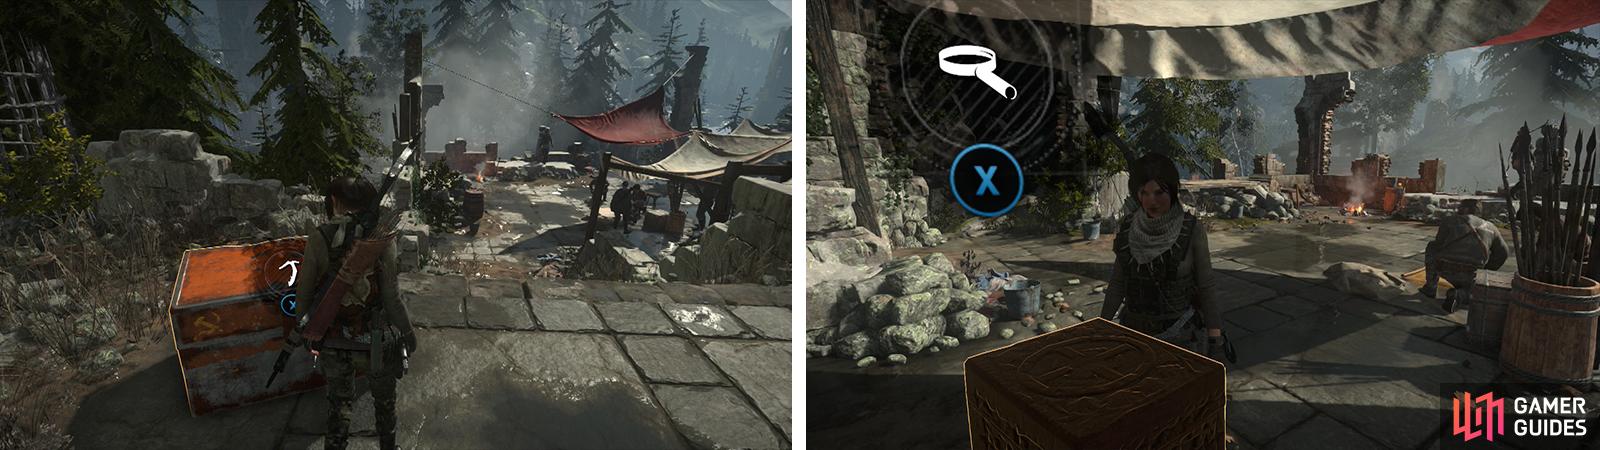 When you reach the Geothermal Valley grab the Strongbox (left). Beneath the white tent you'll find Relic 01 (right).